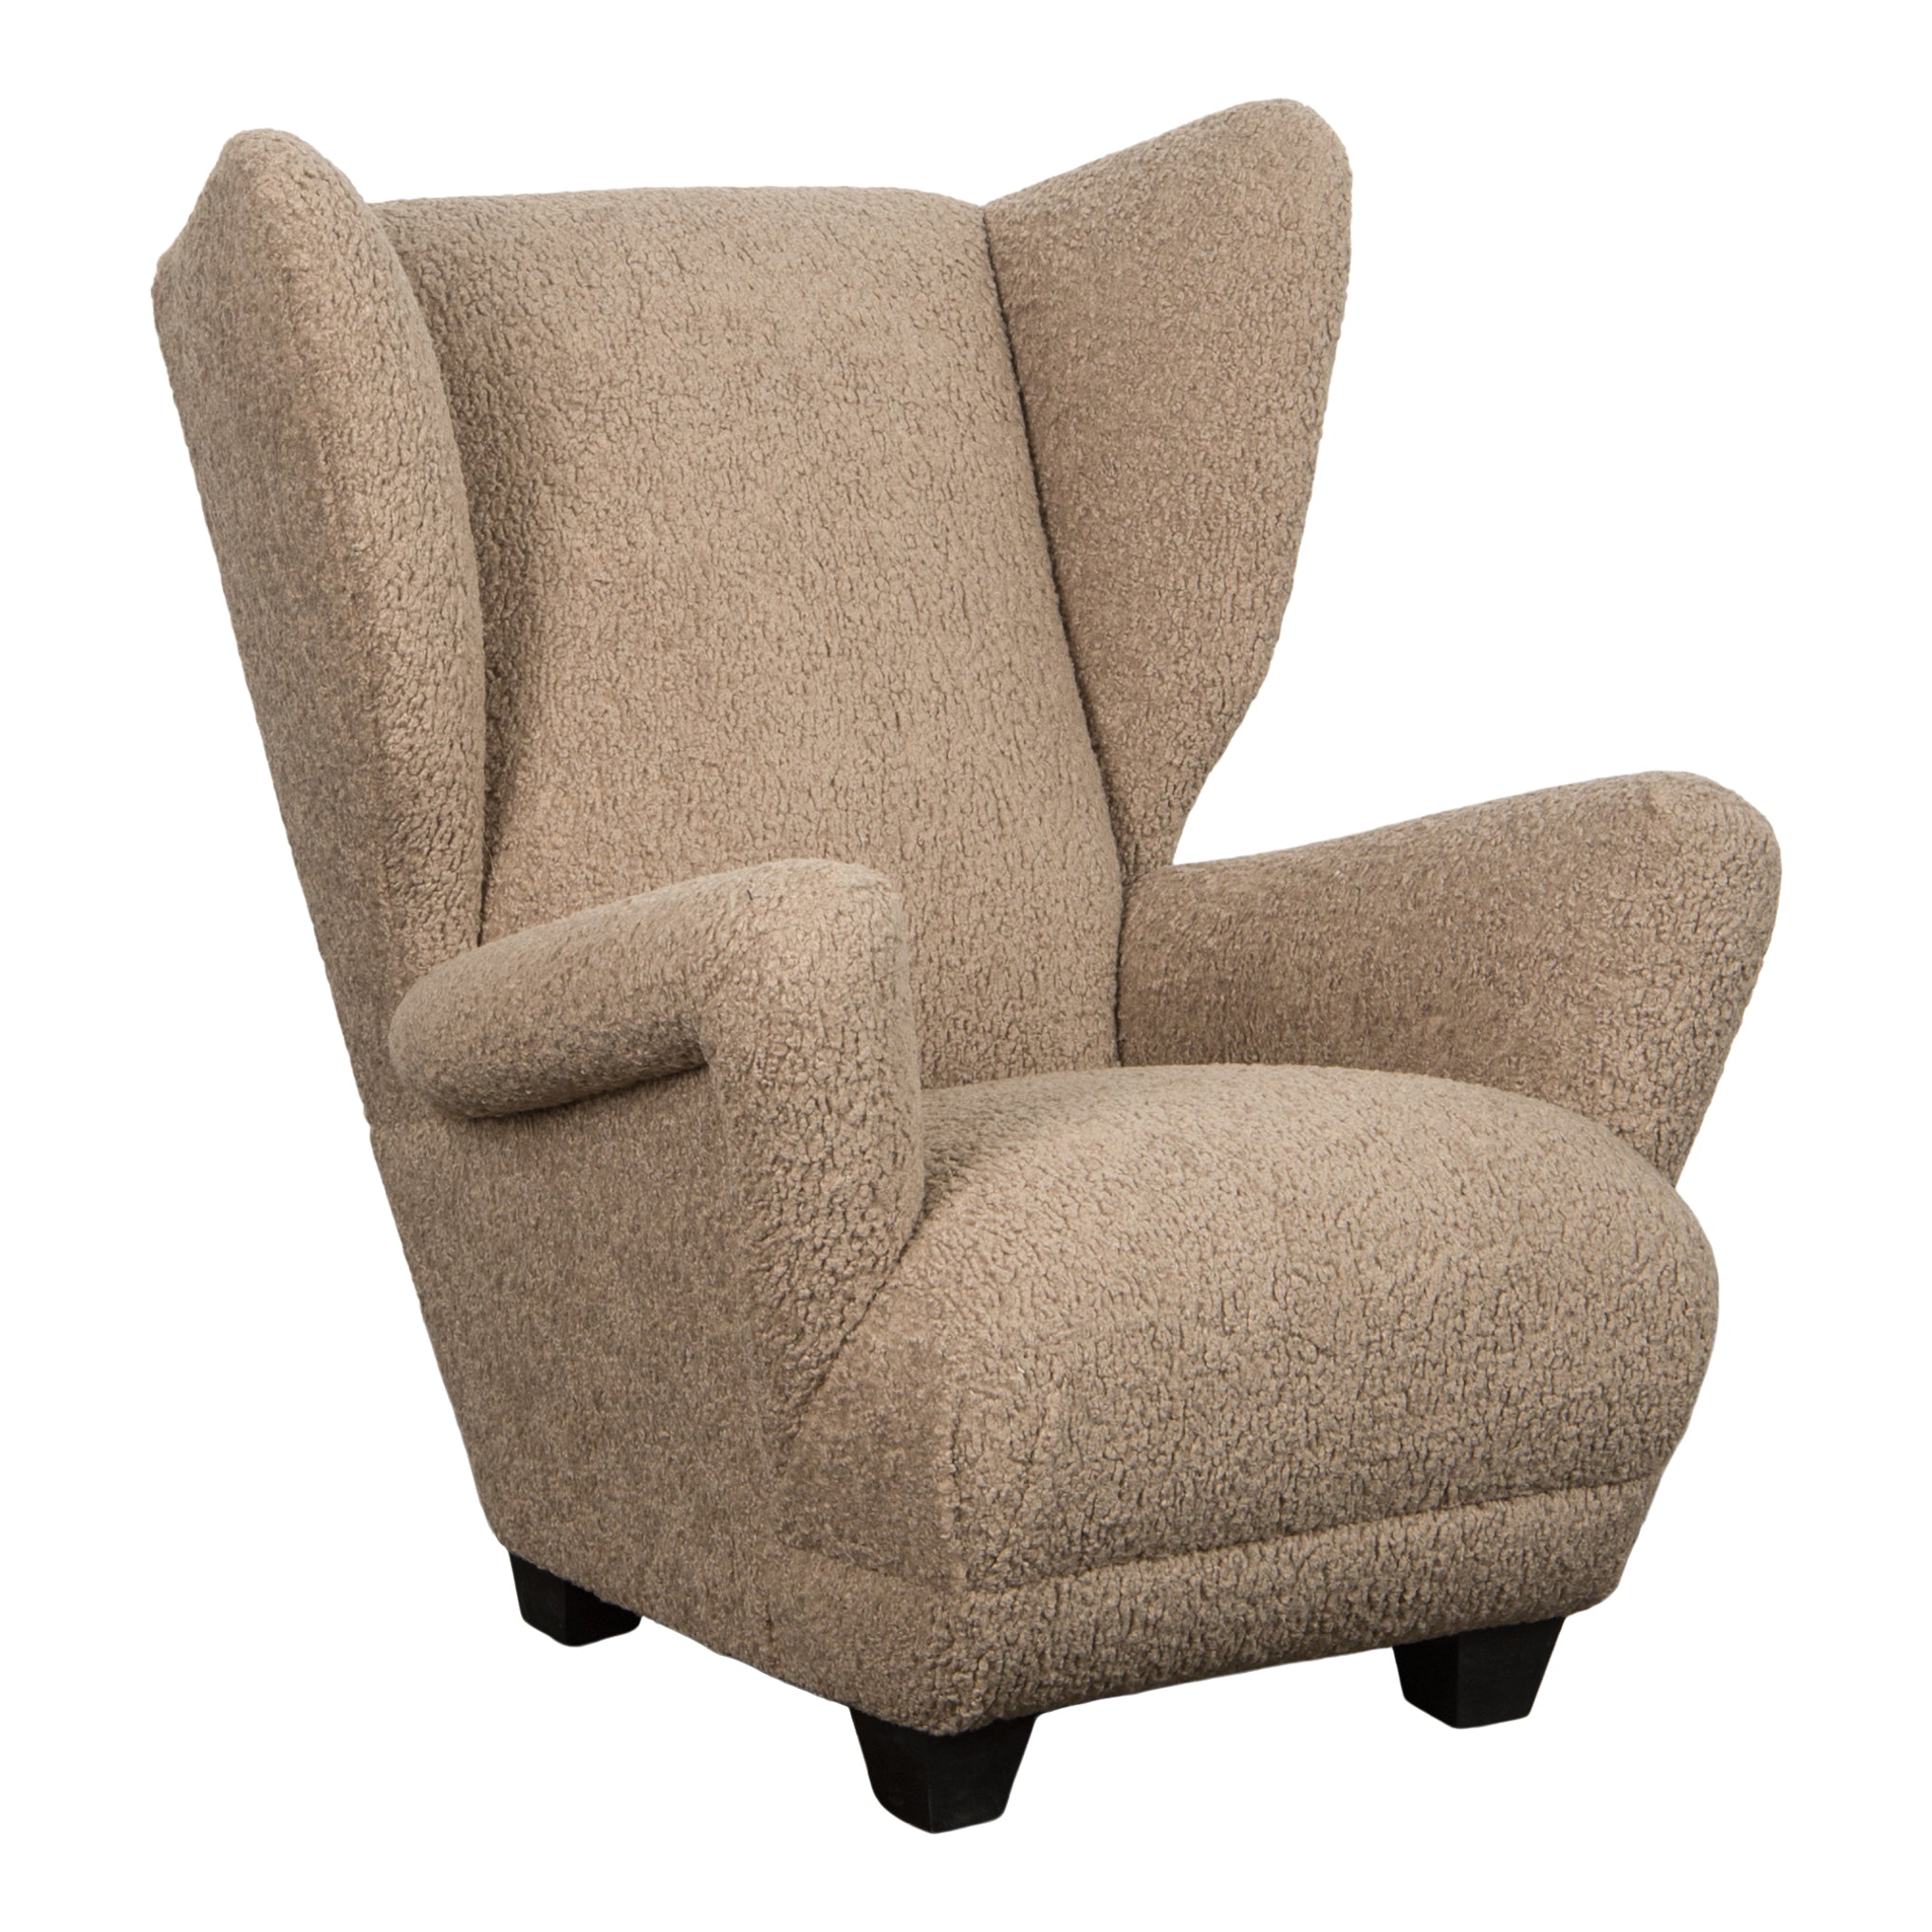 Emberly Toffee Wingback Chair